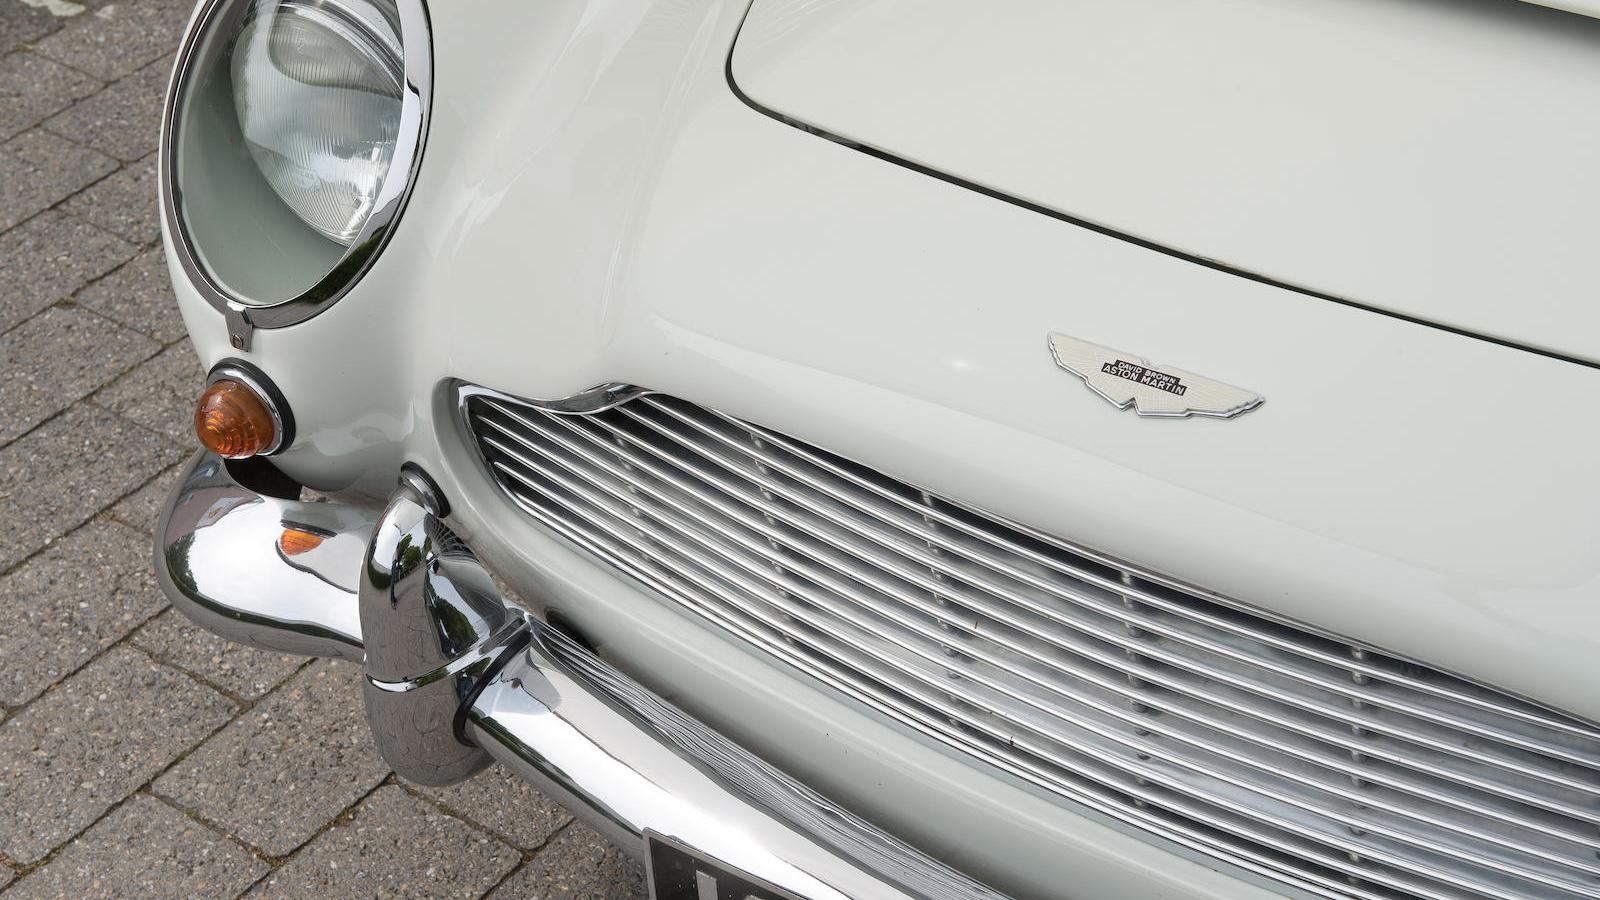 Ultra-rare Aston Martin expected to sell for £900,000 this weekend